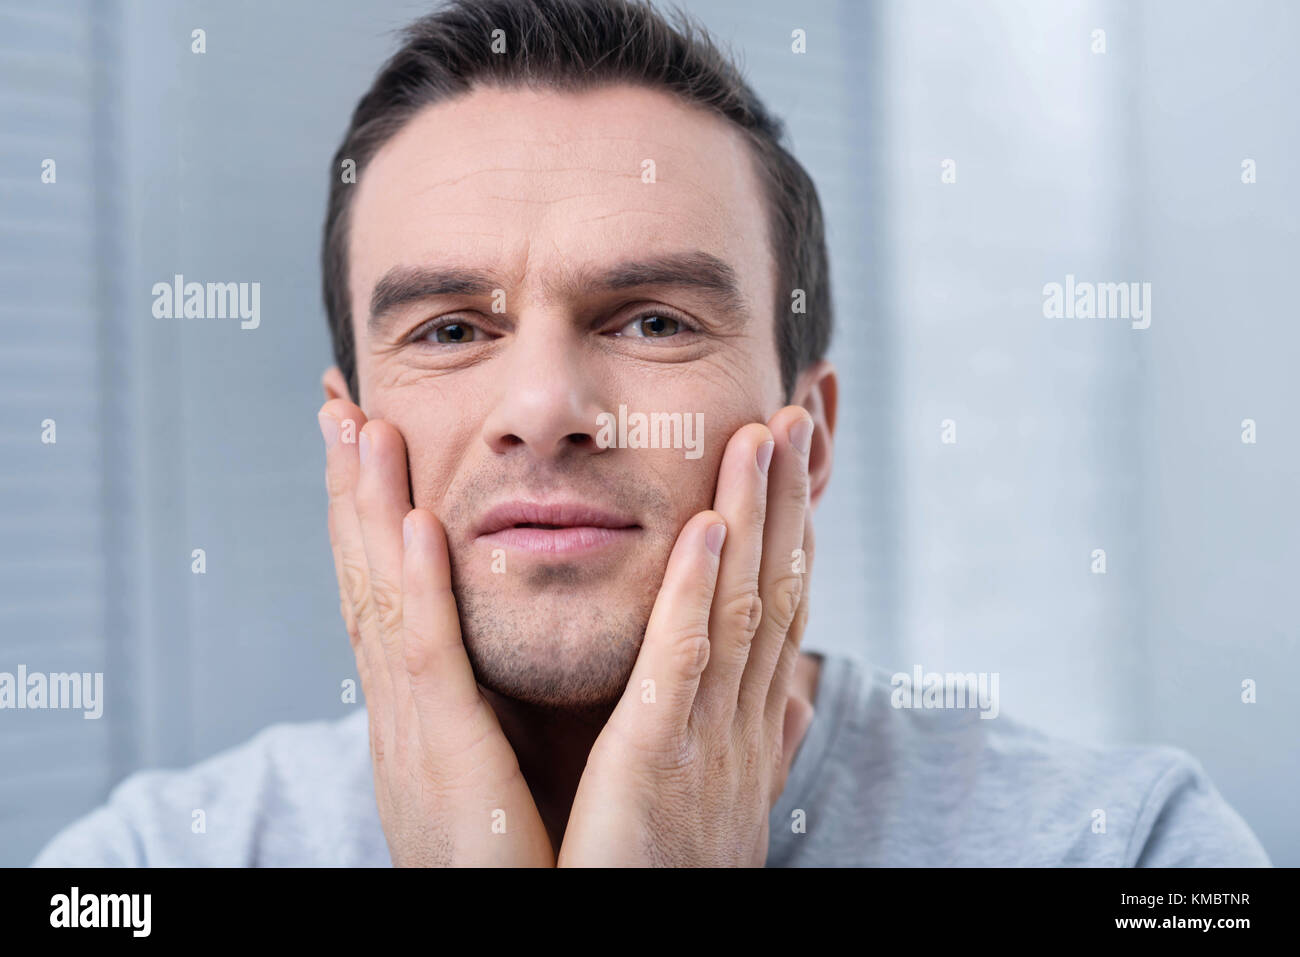 Young handsome man moisturizing his skin Stock Photo